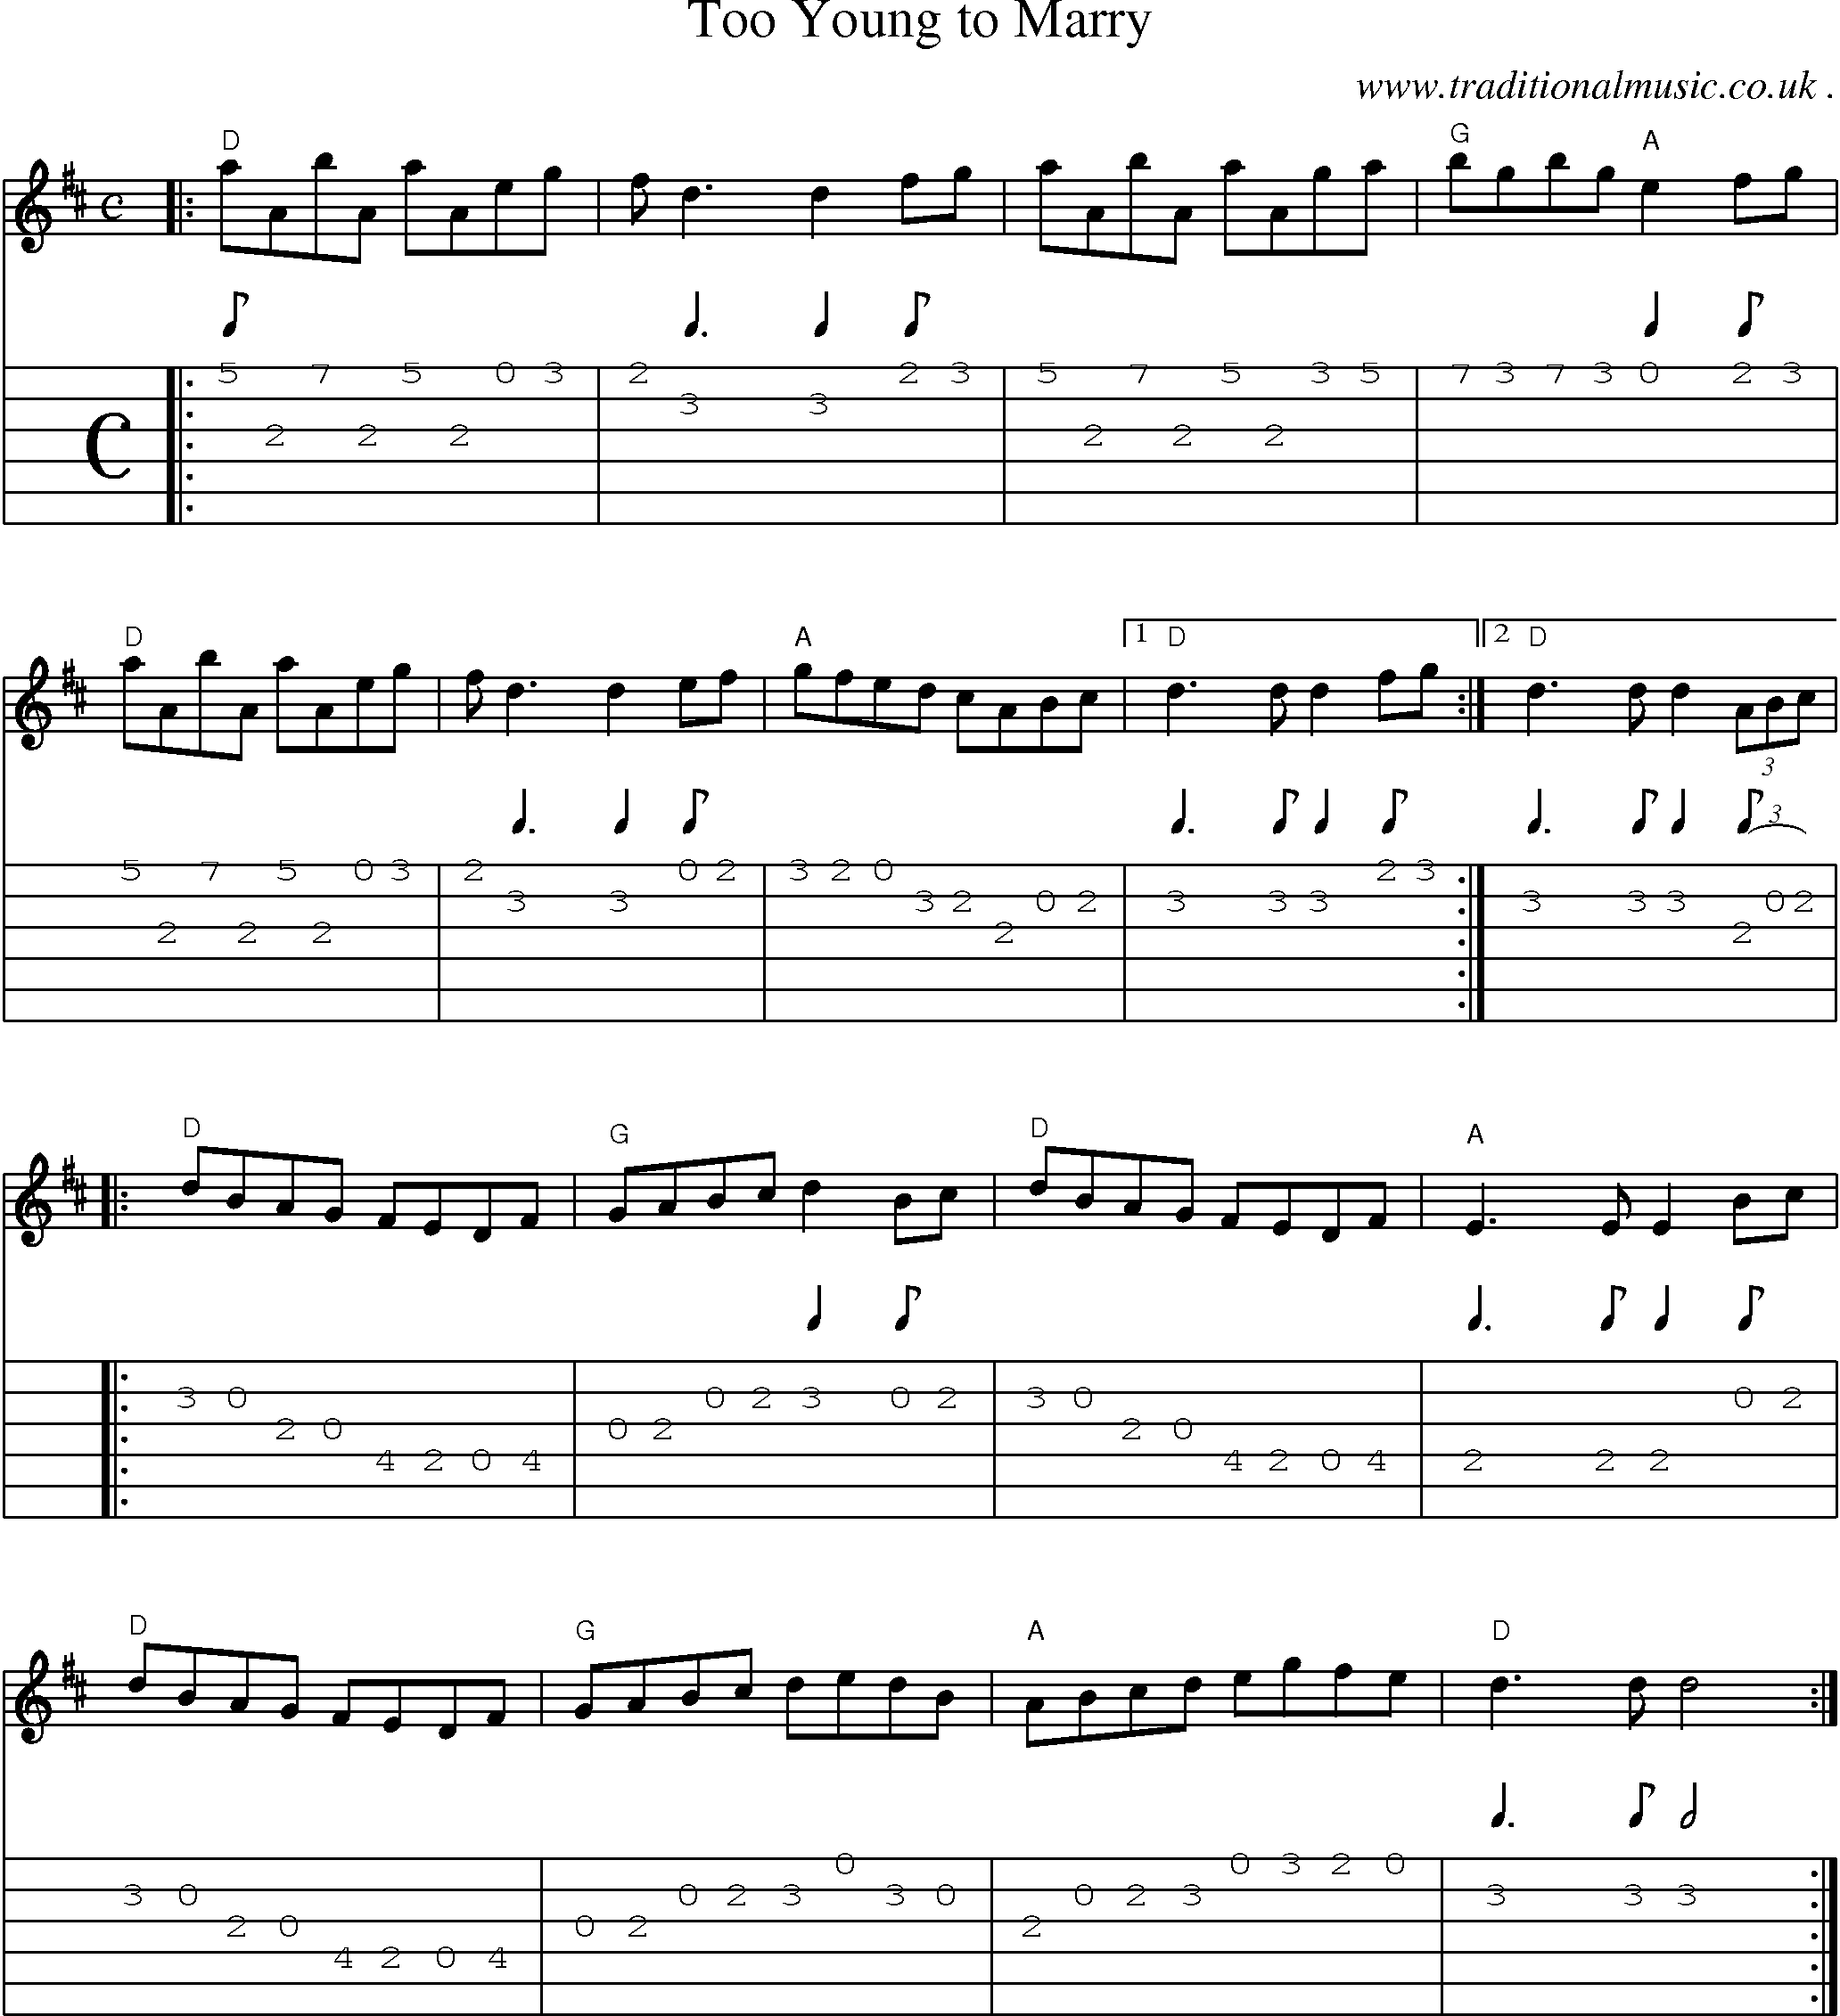 Music Score and Guitar Tabs for Too Young To Marry